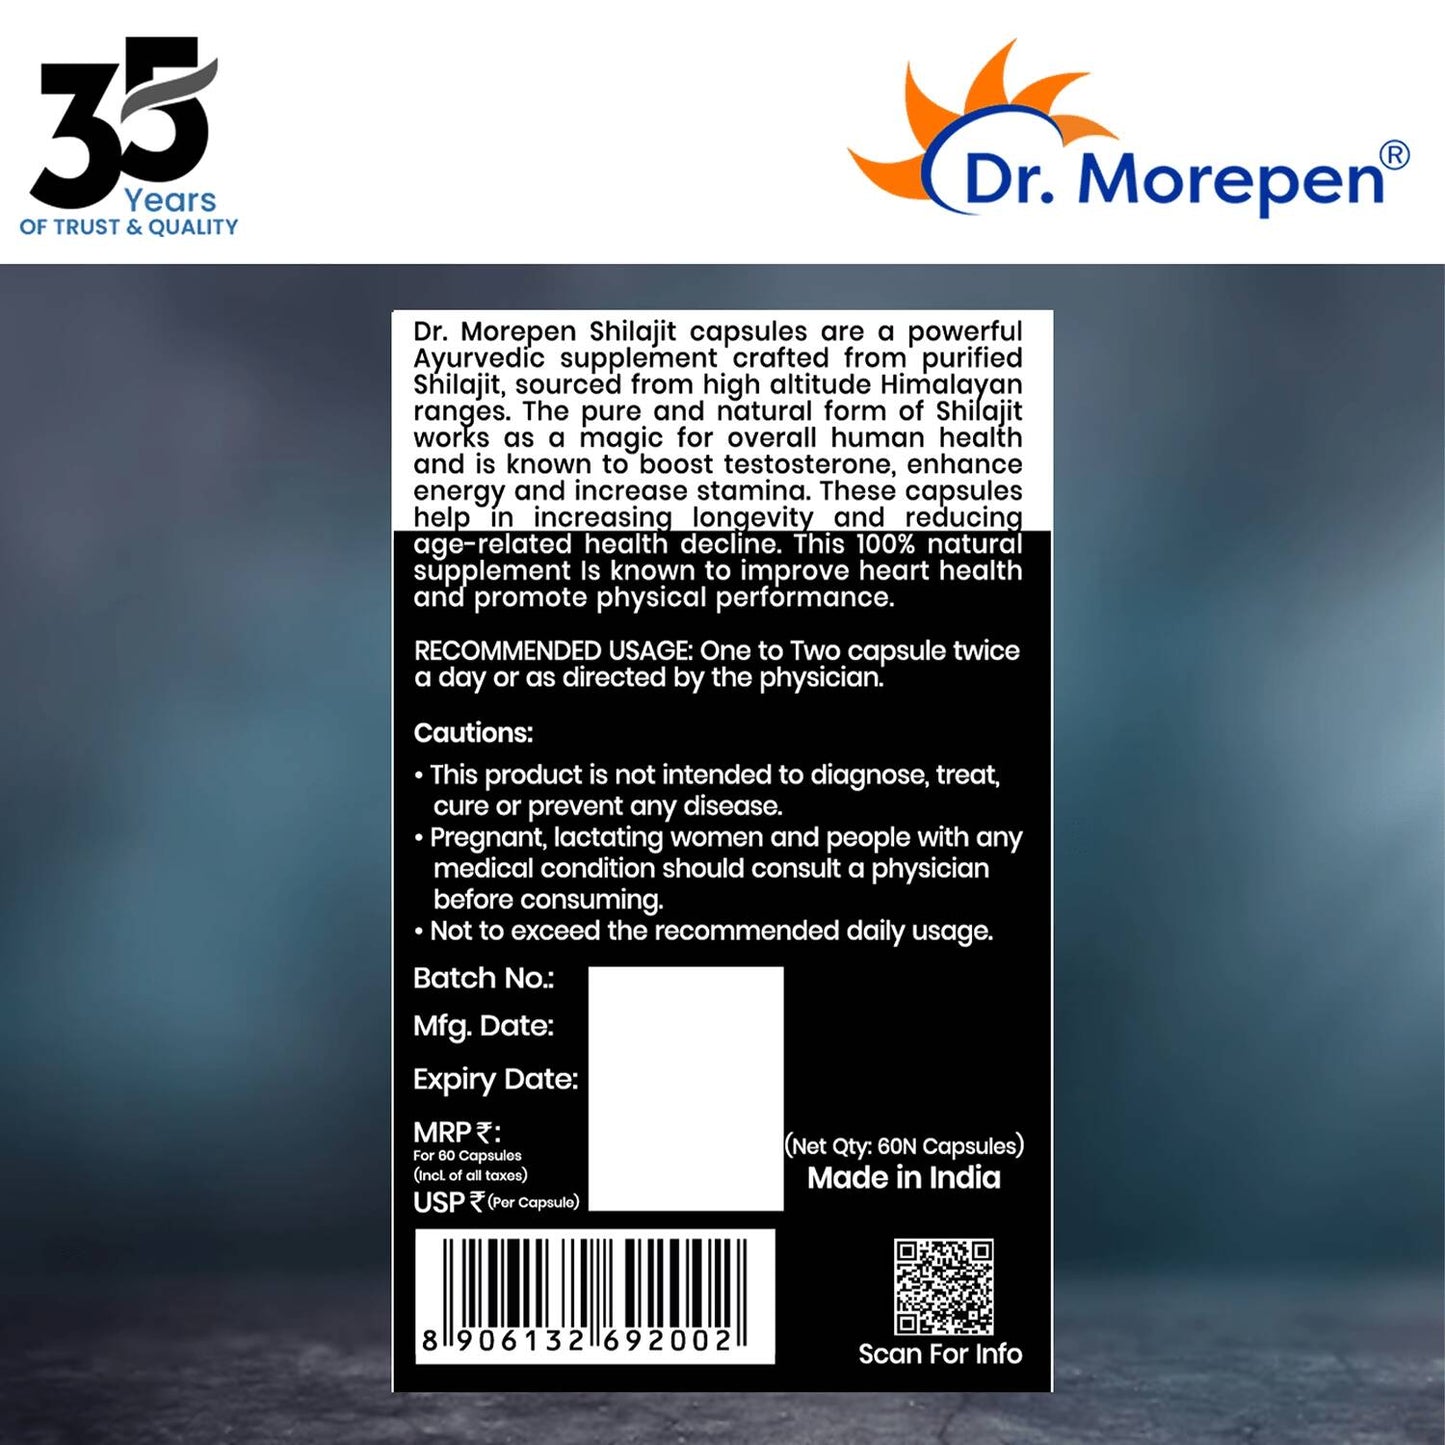 Dr. Morepen S J Capsules and Testosterone Booster Tablets Combo